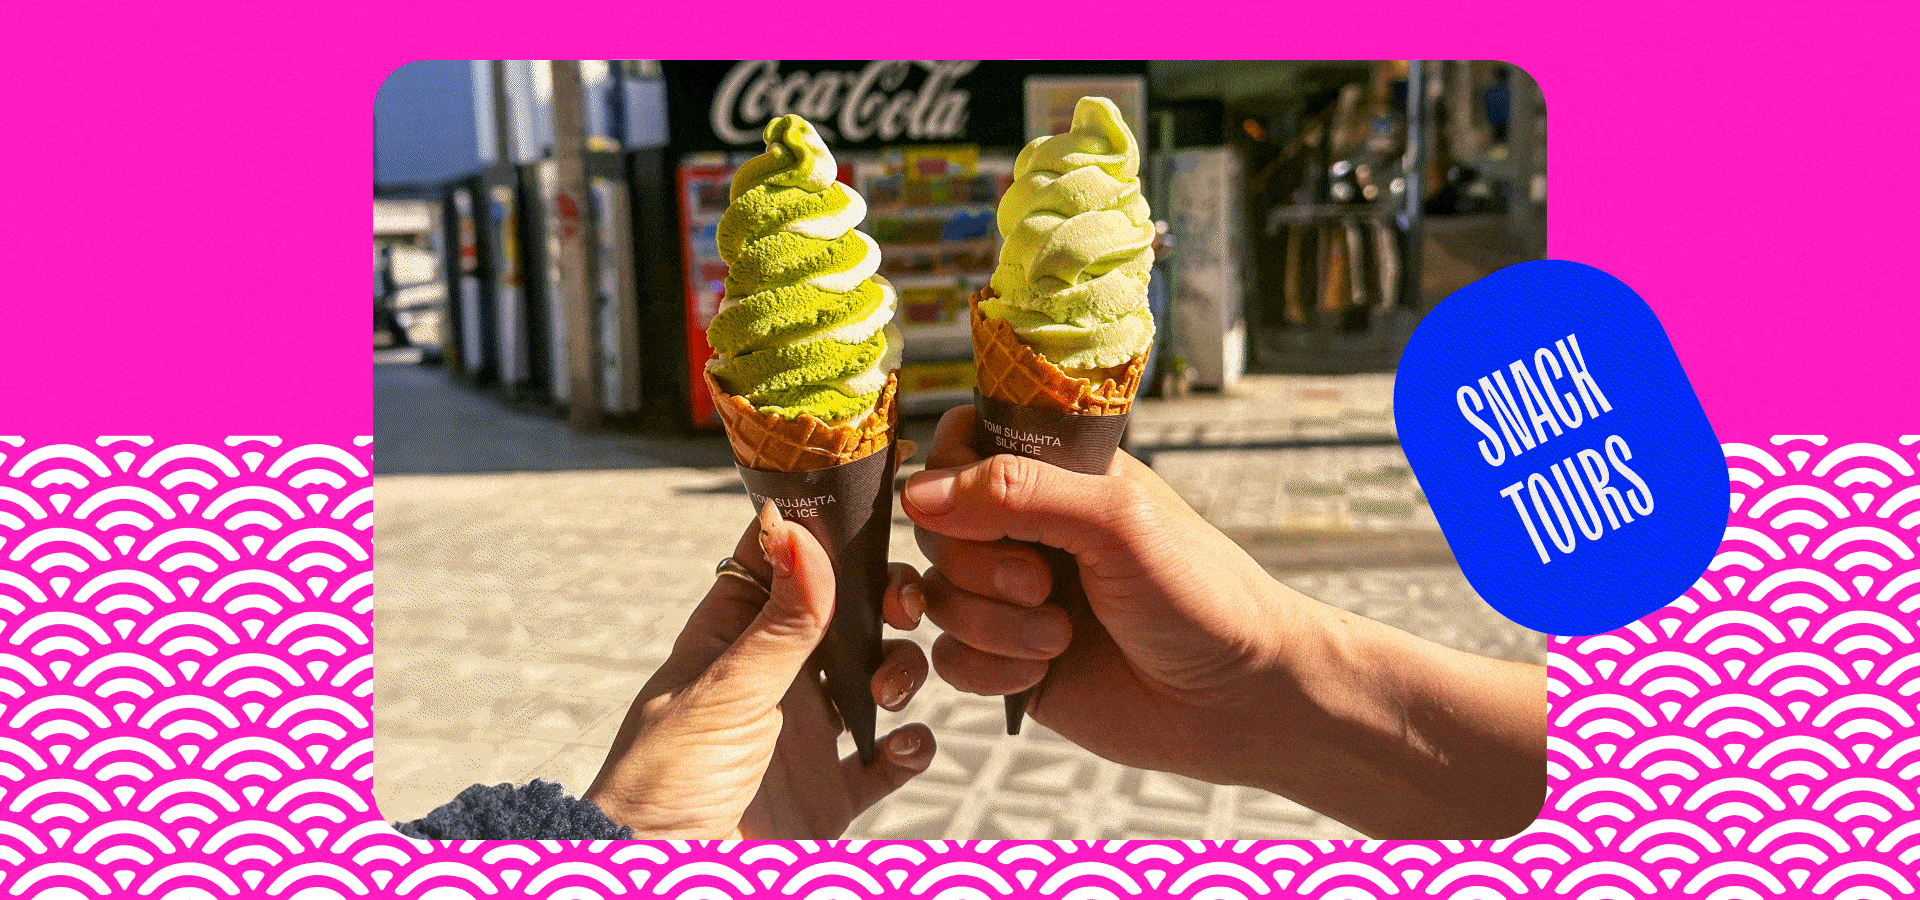 Carousel of images featuring two hands holding soft serve matcha ice cream cones, an Asian man and woman smiling for the camera at a street market, a man strolling underneath a canopy of cherry blossom trees, and a field of matcha plants.